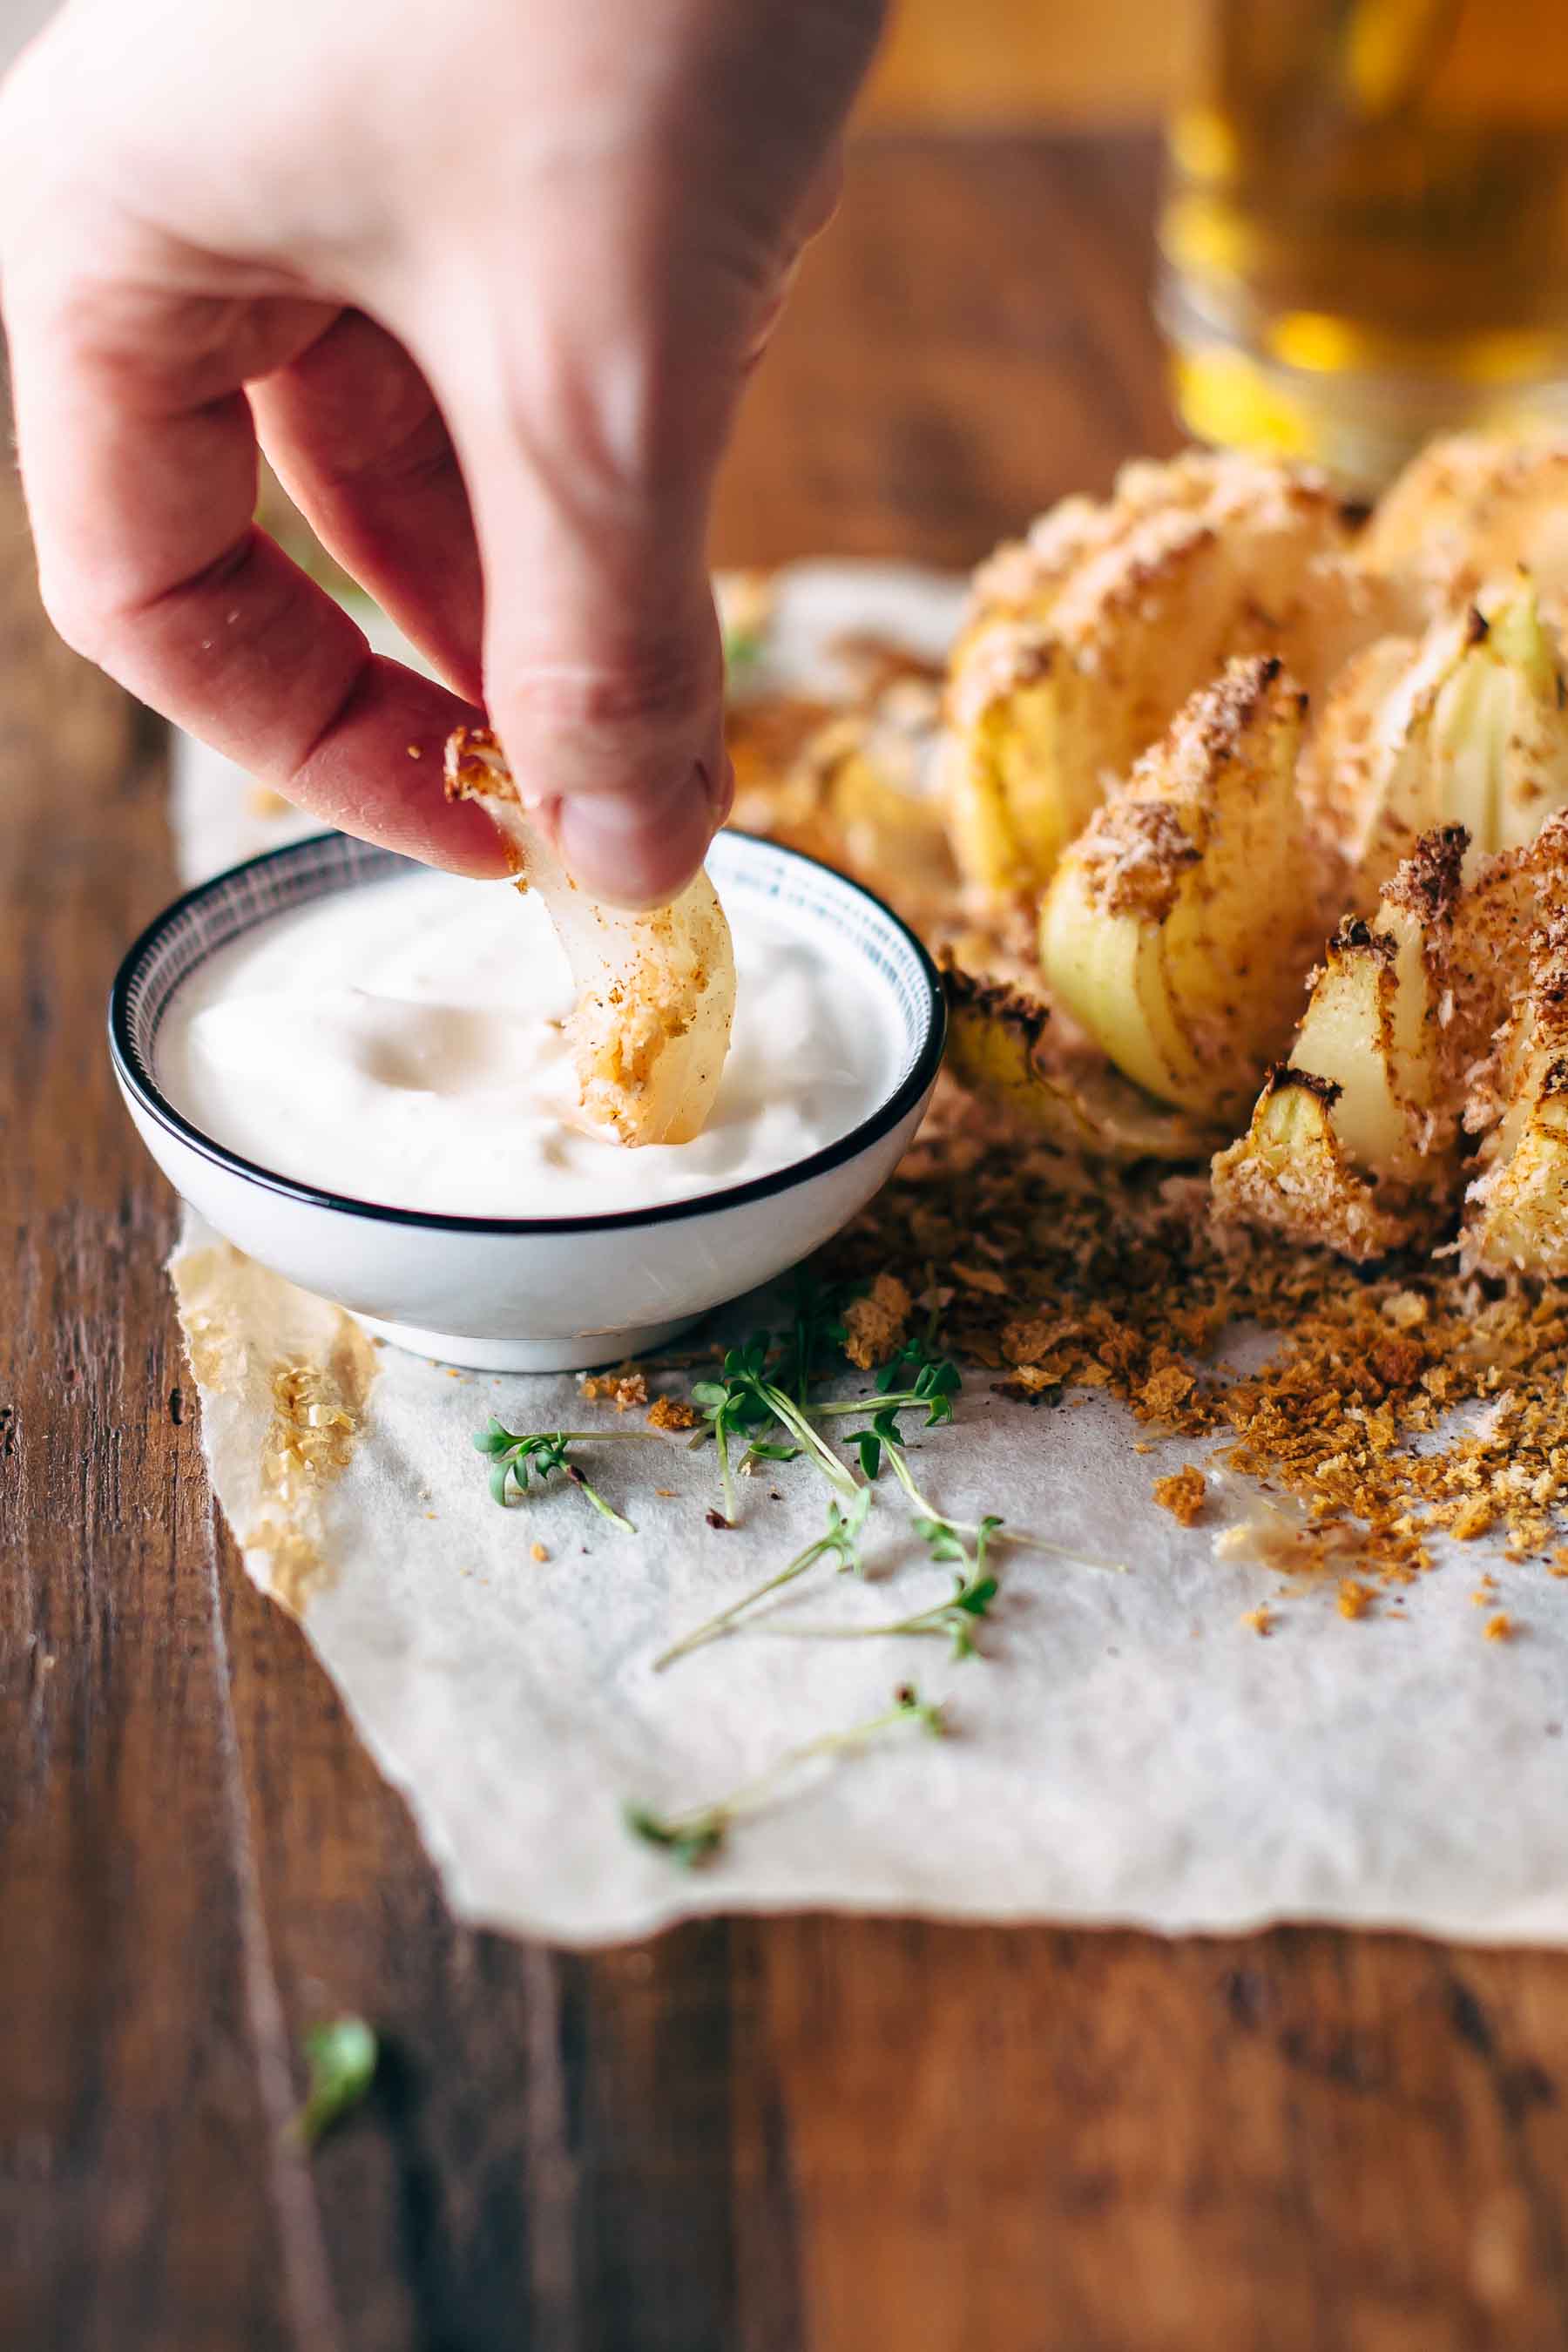 Baked Blooming Onion Healthier Bloomin Onion Video